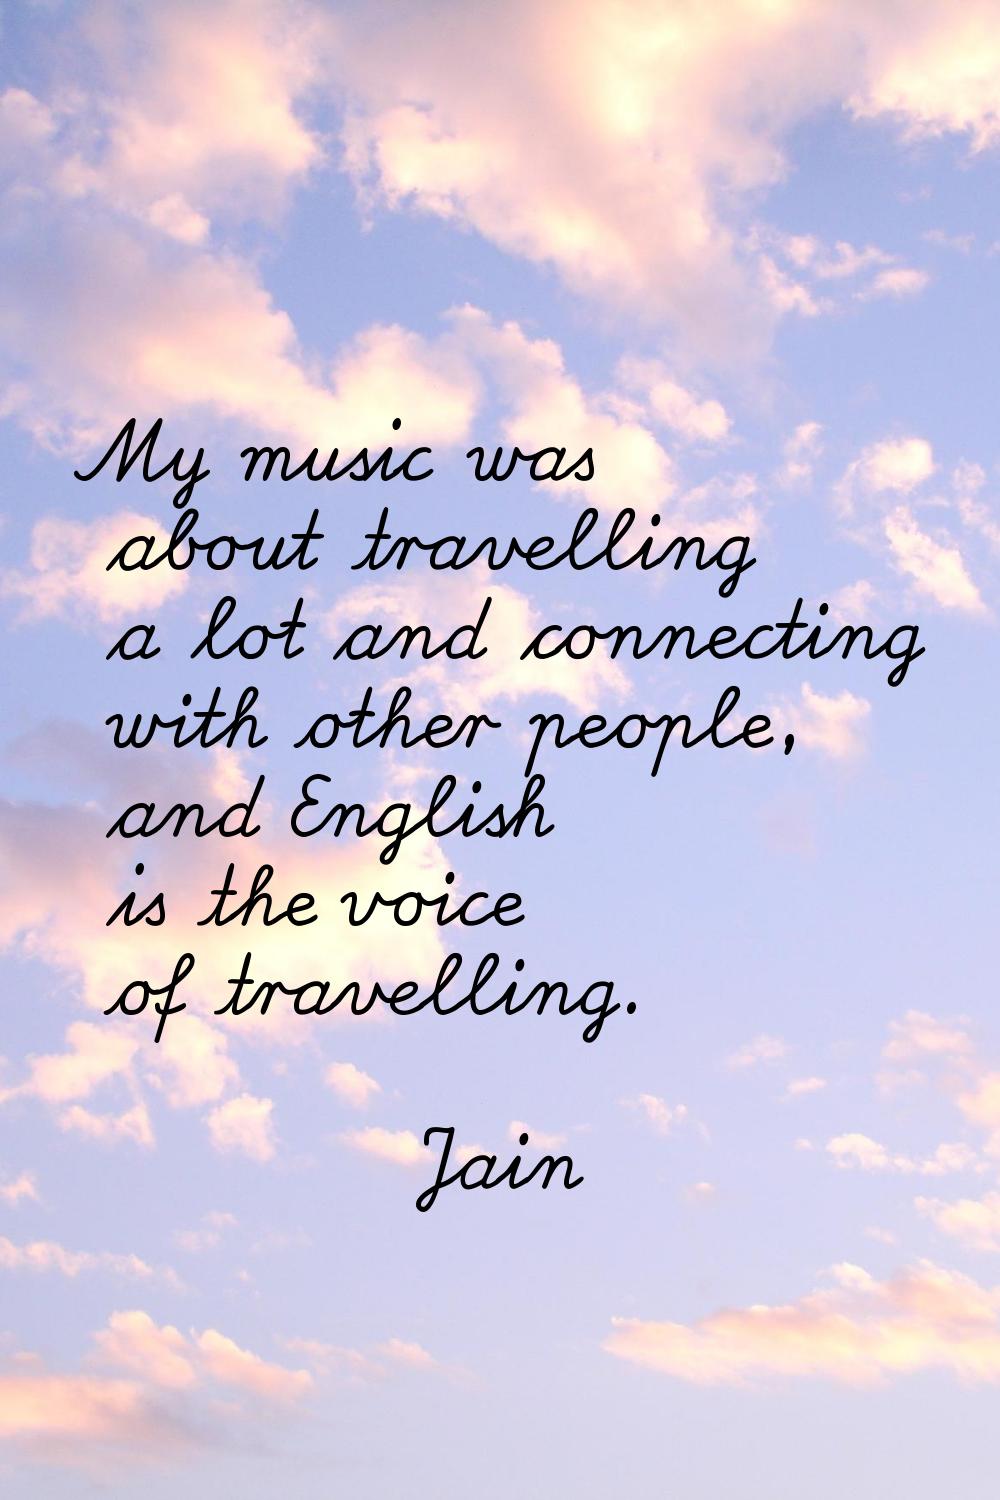 My music was about travelling a lot and connecting with other people, and English is the voice of t